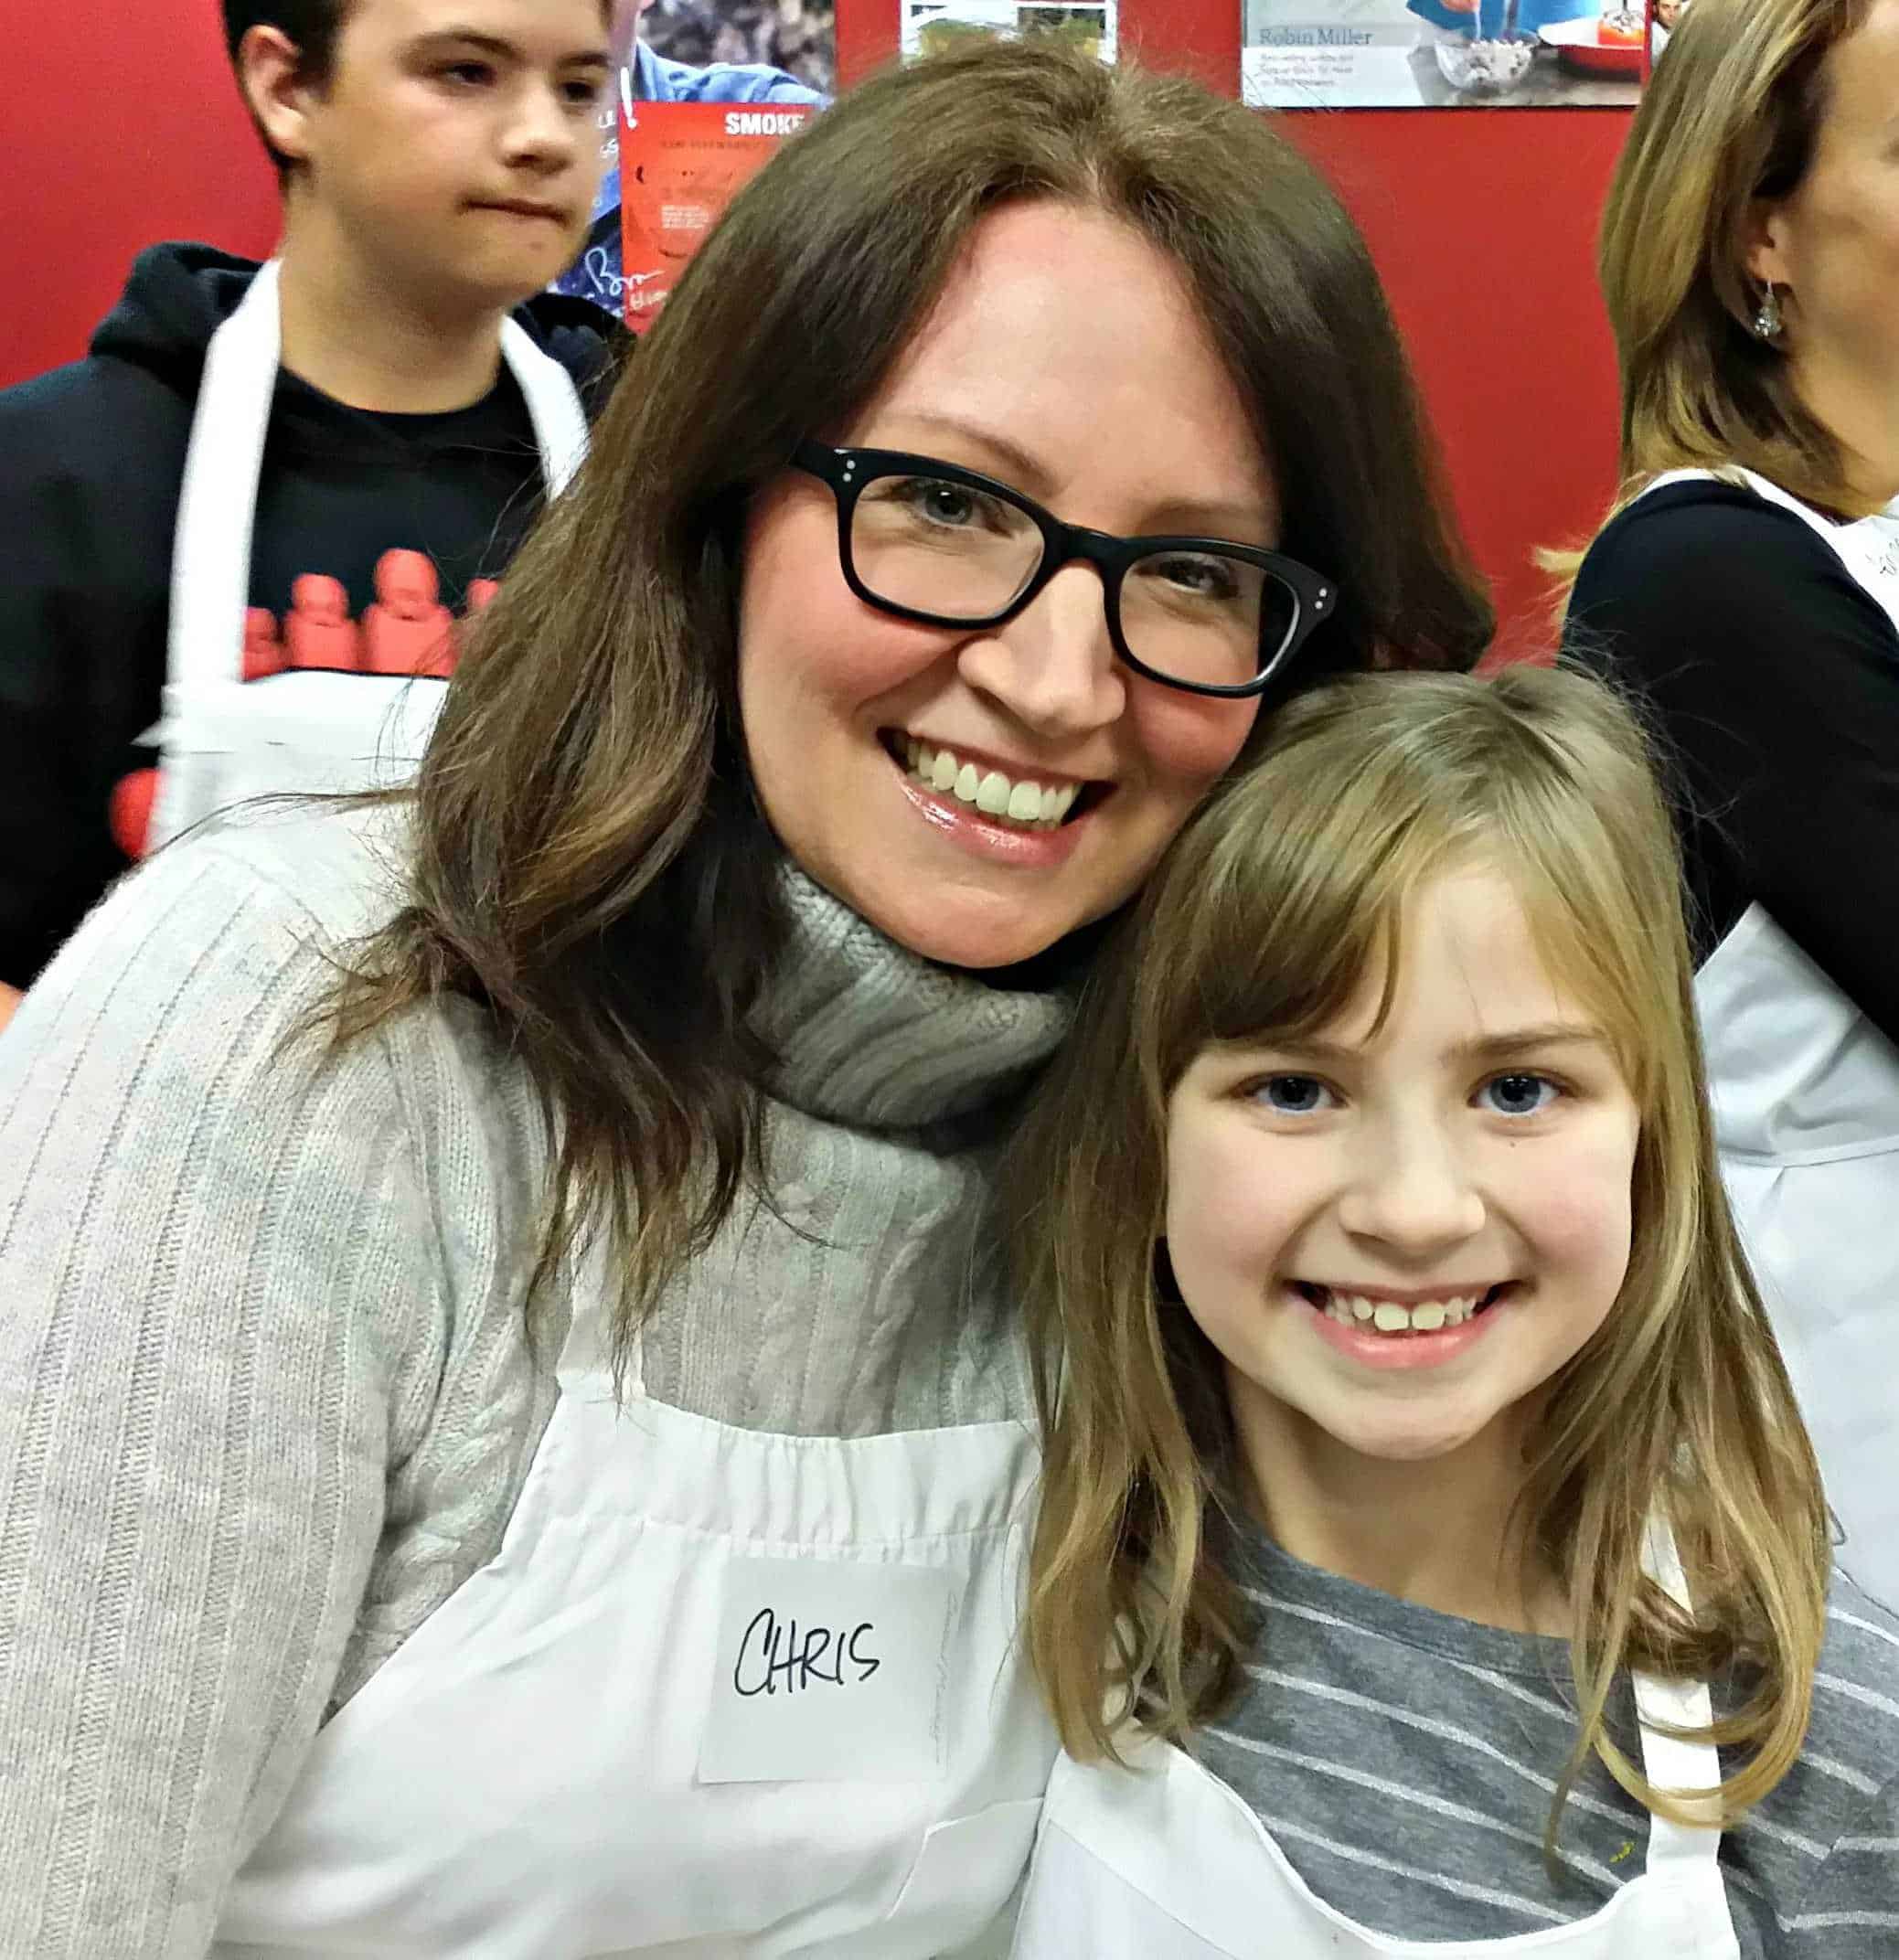 A Cooking Class Makes a Great Girls Night Out!